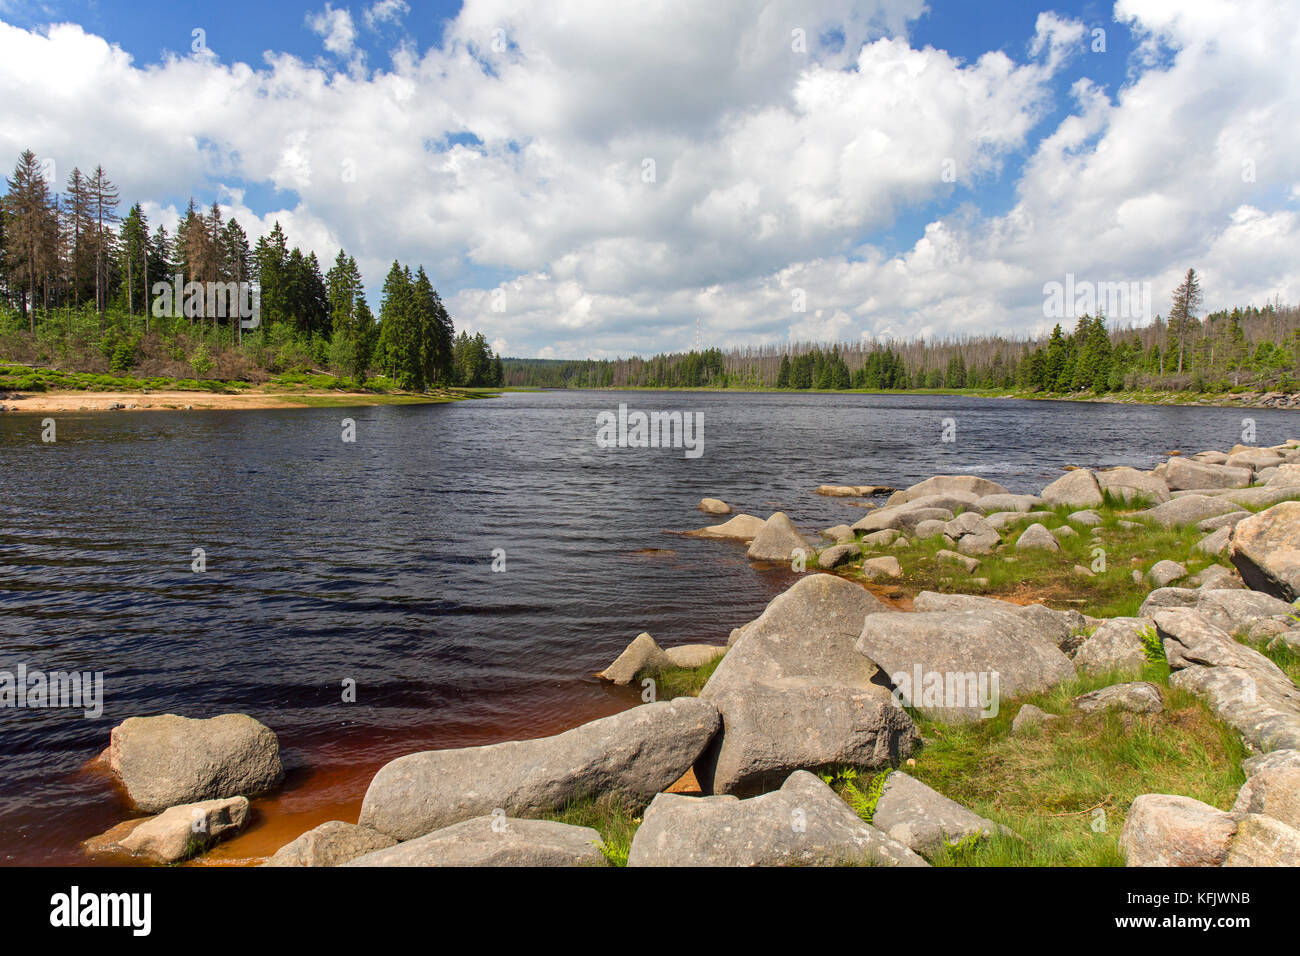 Oderteich, historic reservoir near Sankt Andreasberg in the Upper Harz National Park, Lower Saxony, Germany Stock Photo